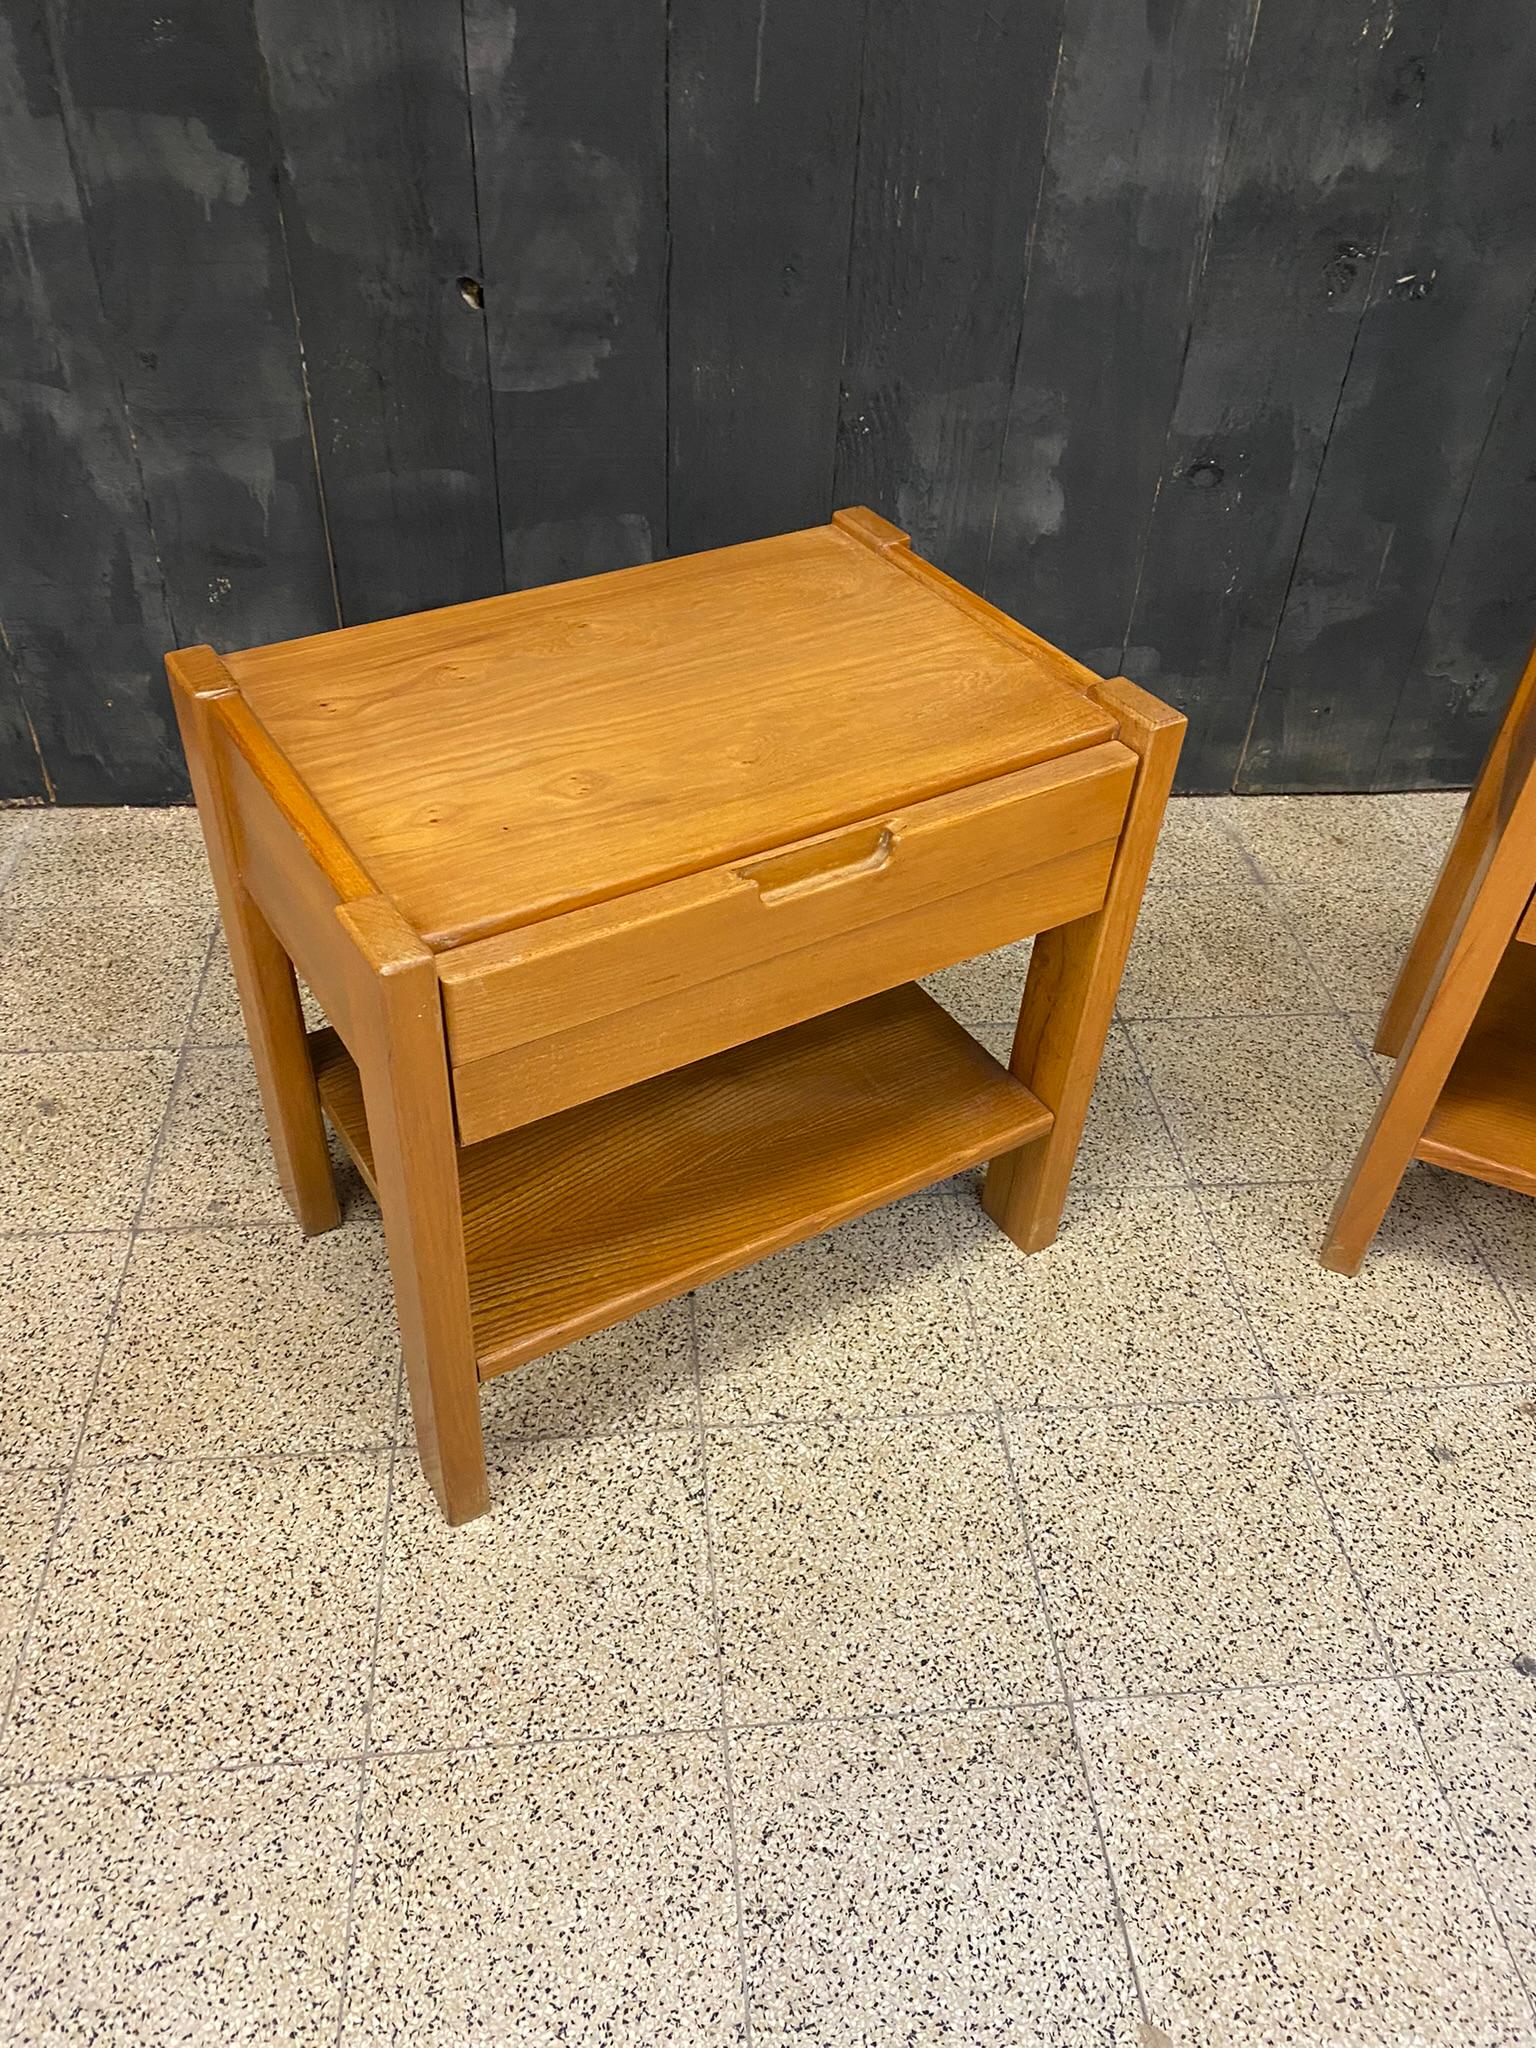 Maison regain two  bedside tables in solid elm opening with a front drawer. Around 1960.
Pierre Chapo style
Very good condition.
price is for one , two are available